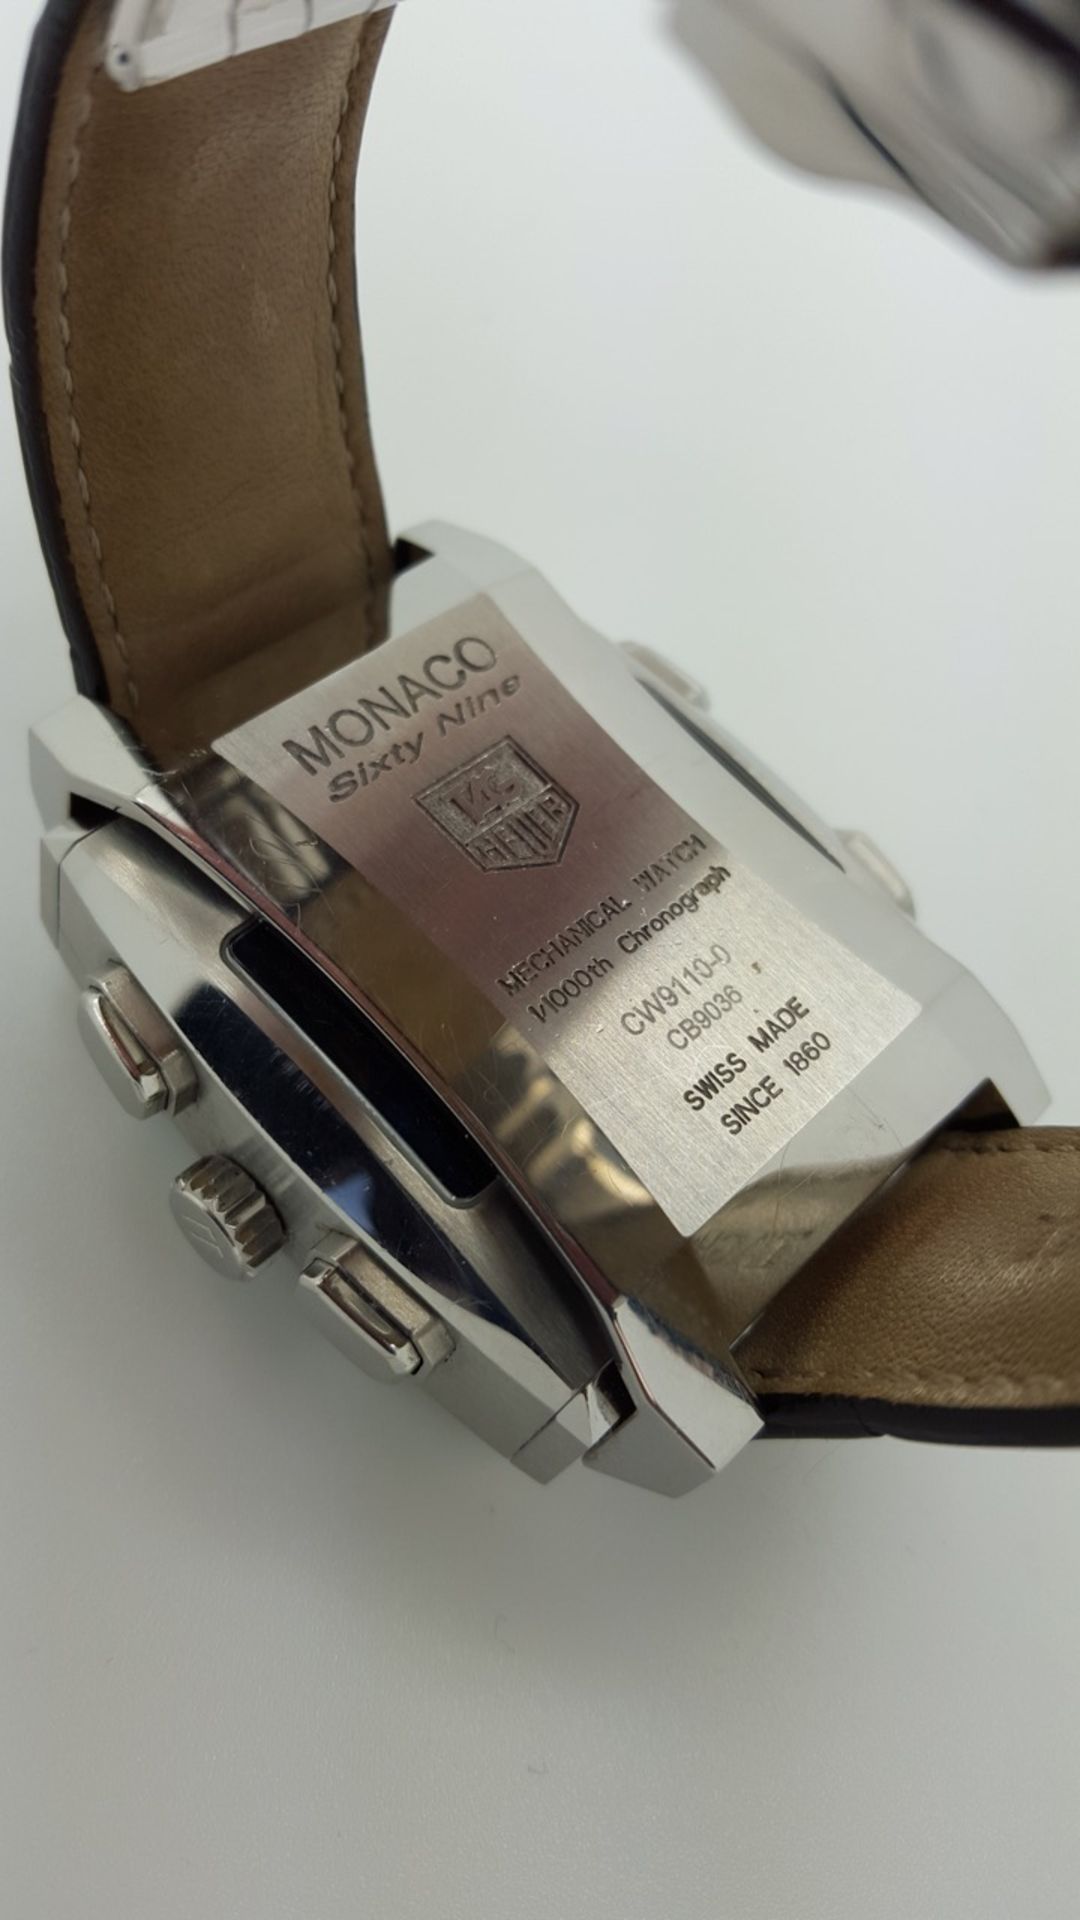 Tag Heuer Monaco sixty nine. Cw91110-0 one side is digital other is analogue . - Image 2 of 5